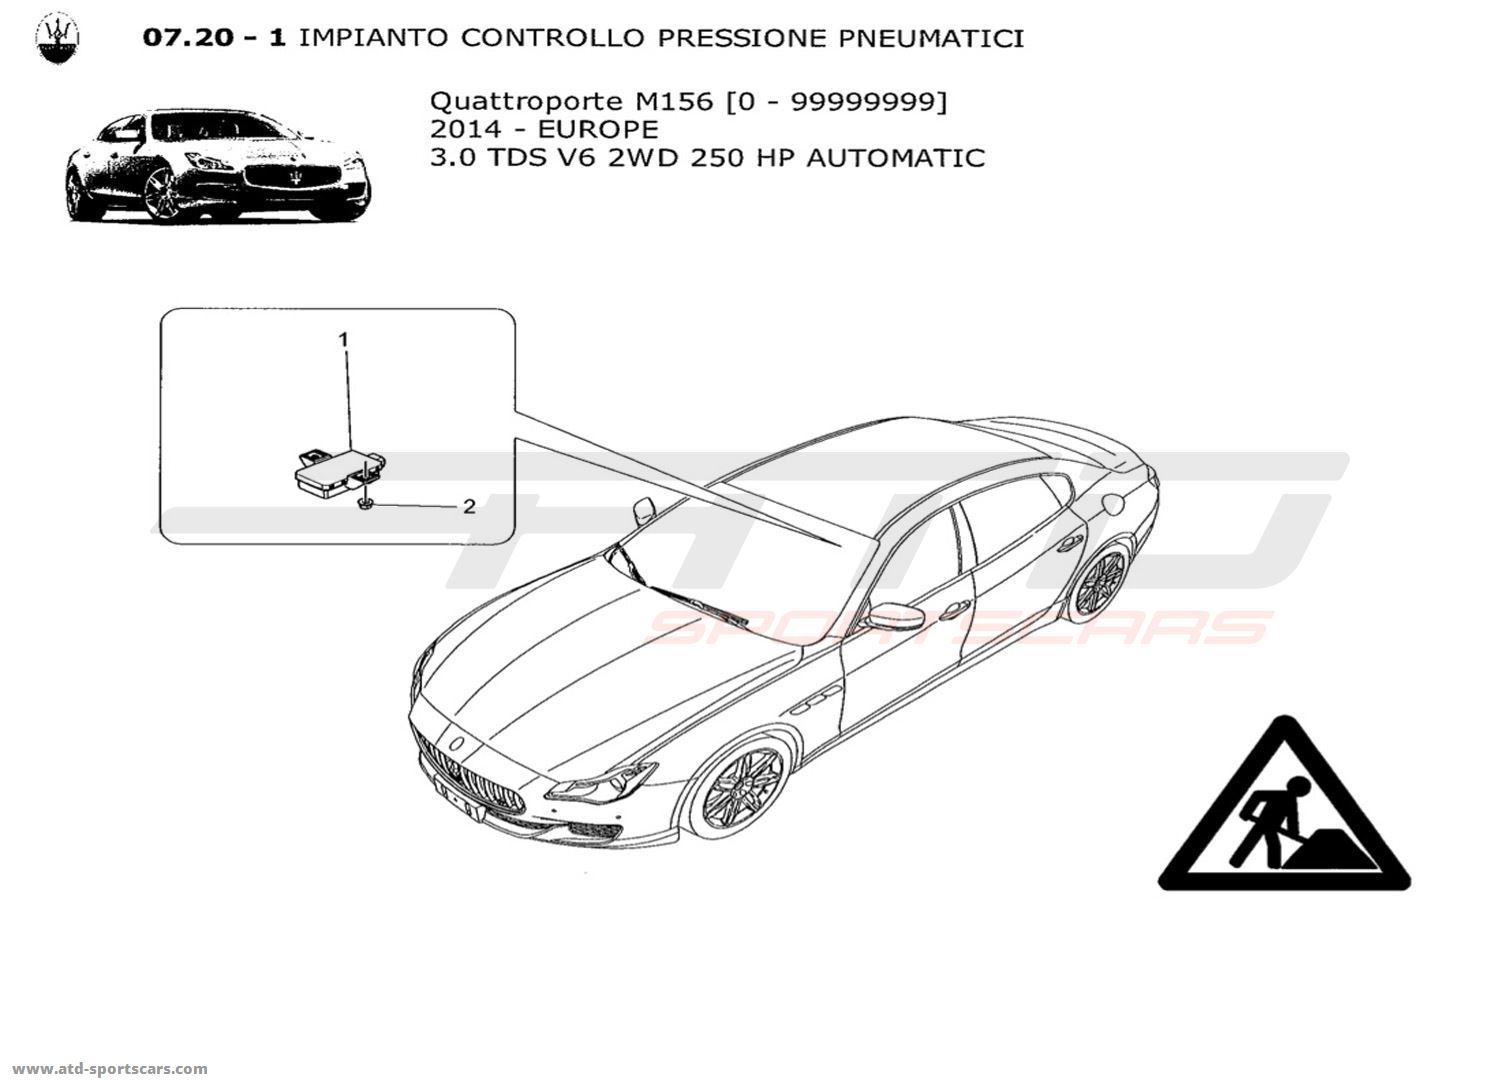 TYRE PRESSURE MONITORING SYSTEM